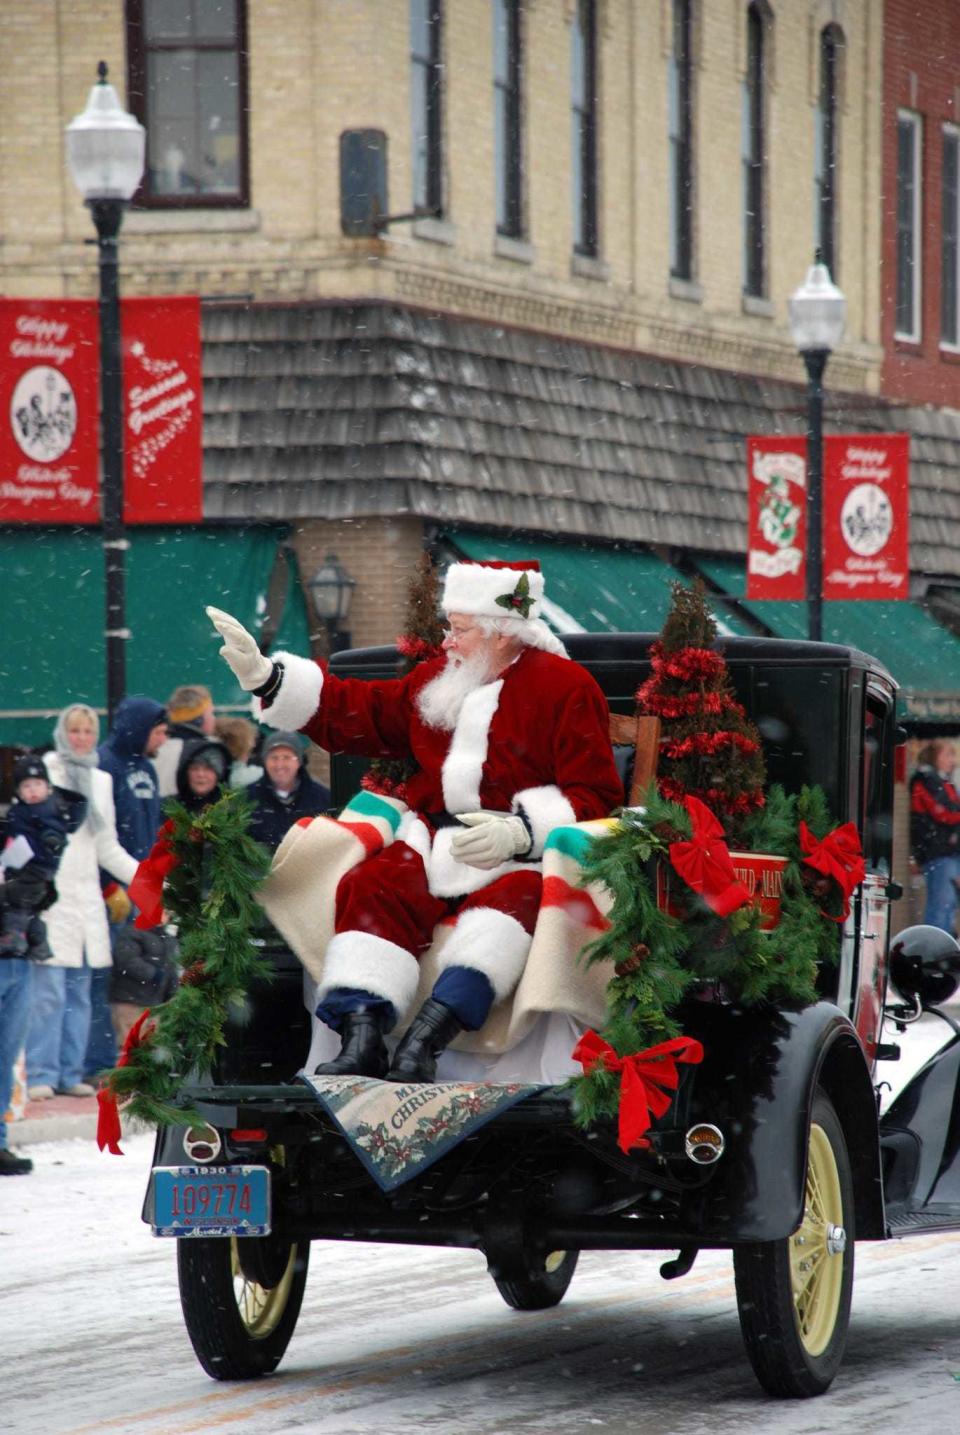 File - The holiday parade and event season is here and town's are bringing back these time-honored traditions in Bucks and Montgomery counties. Find a holiday parade near you. It's sure to be a festive time.